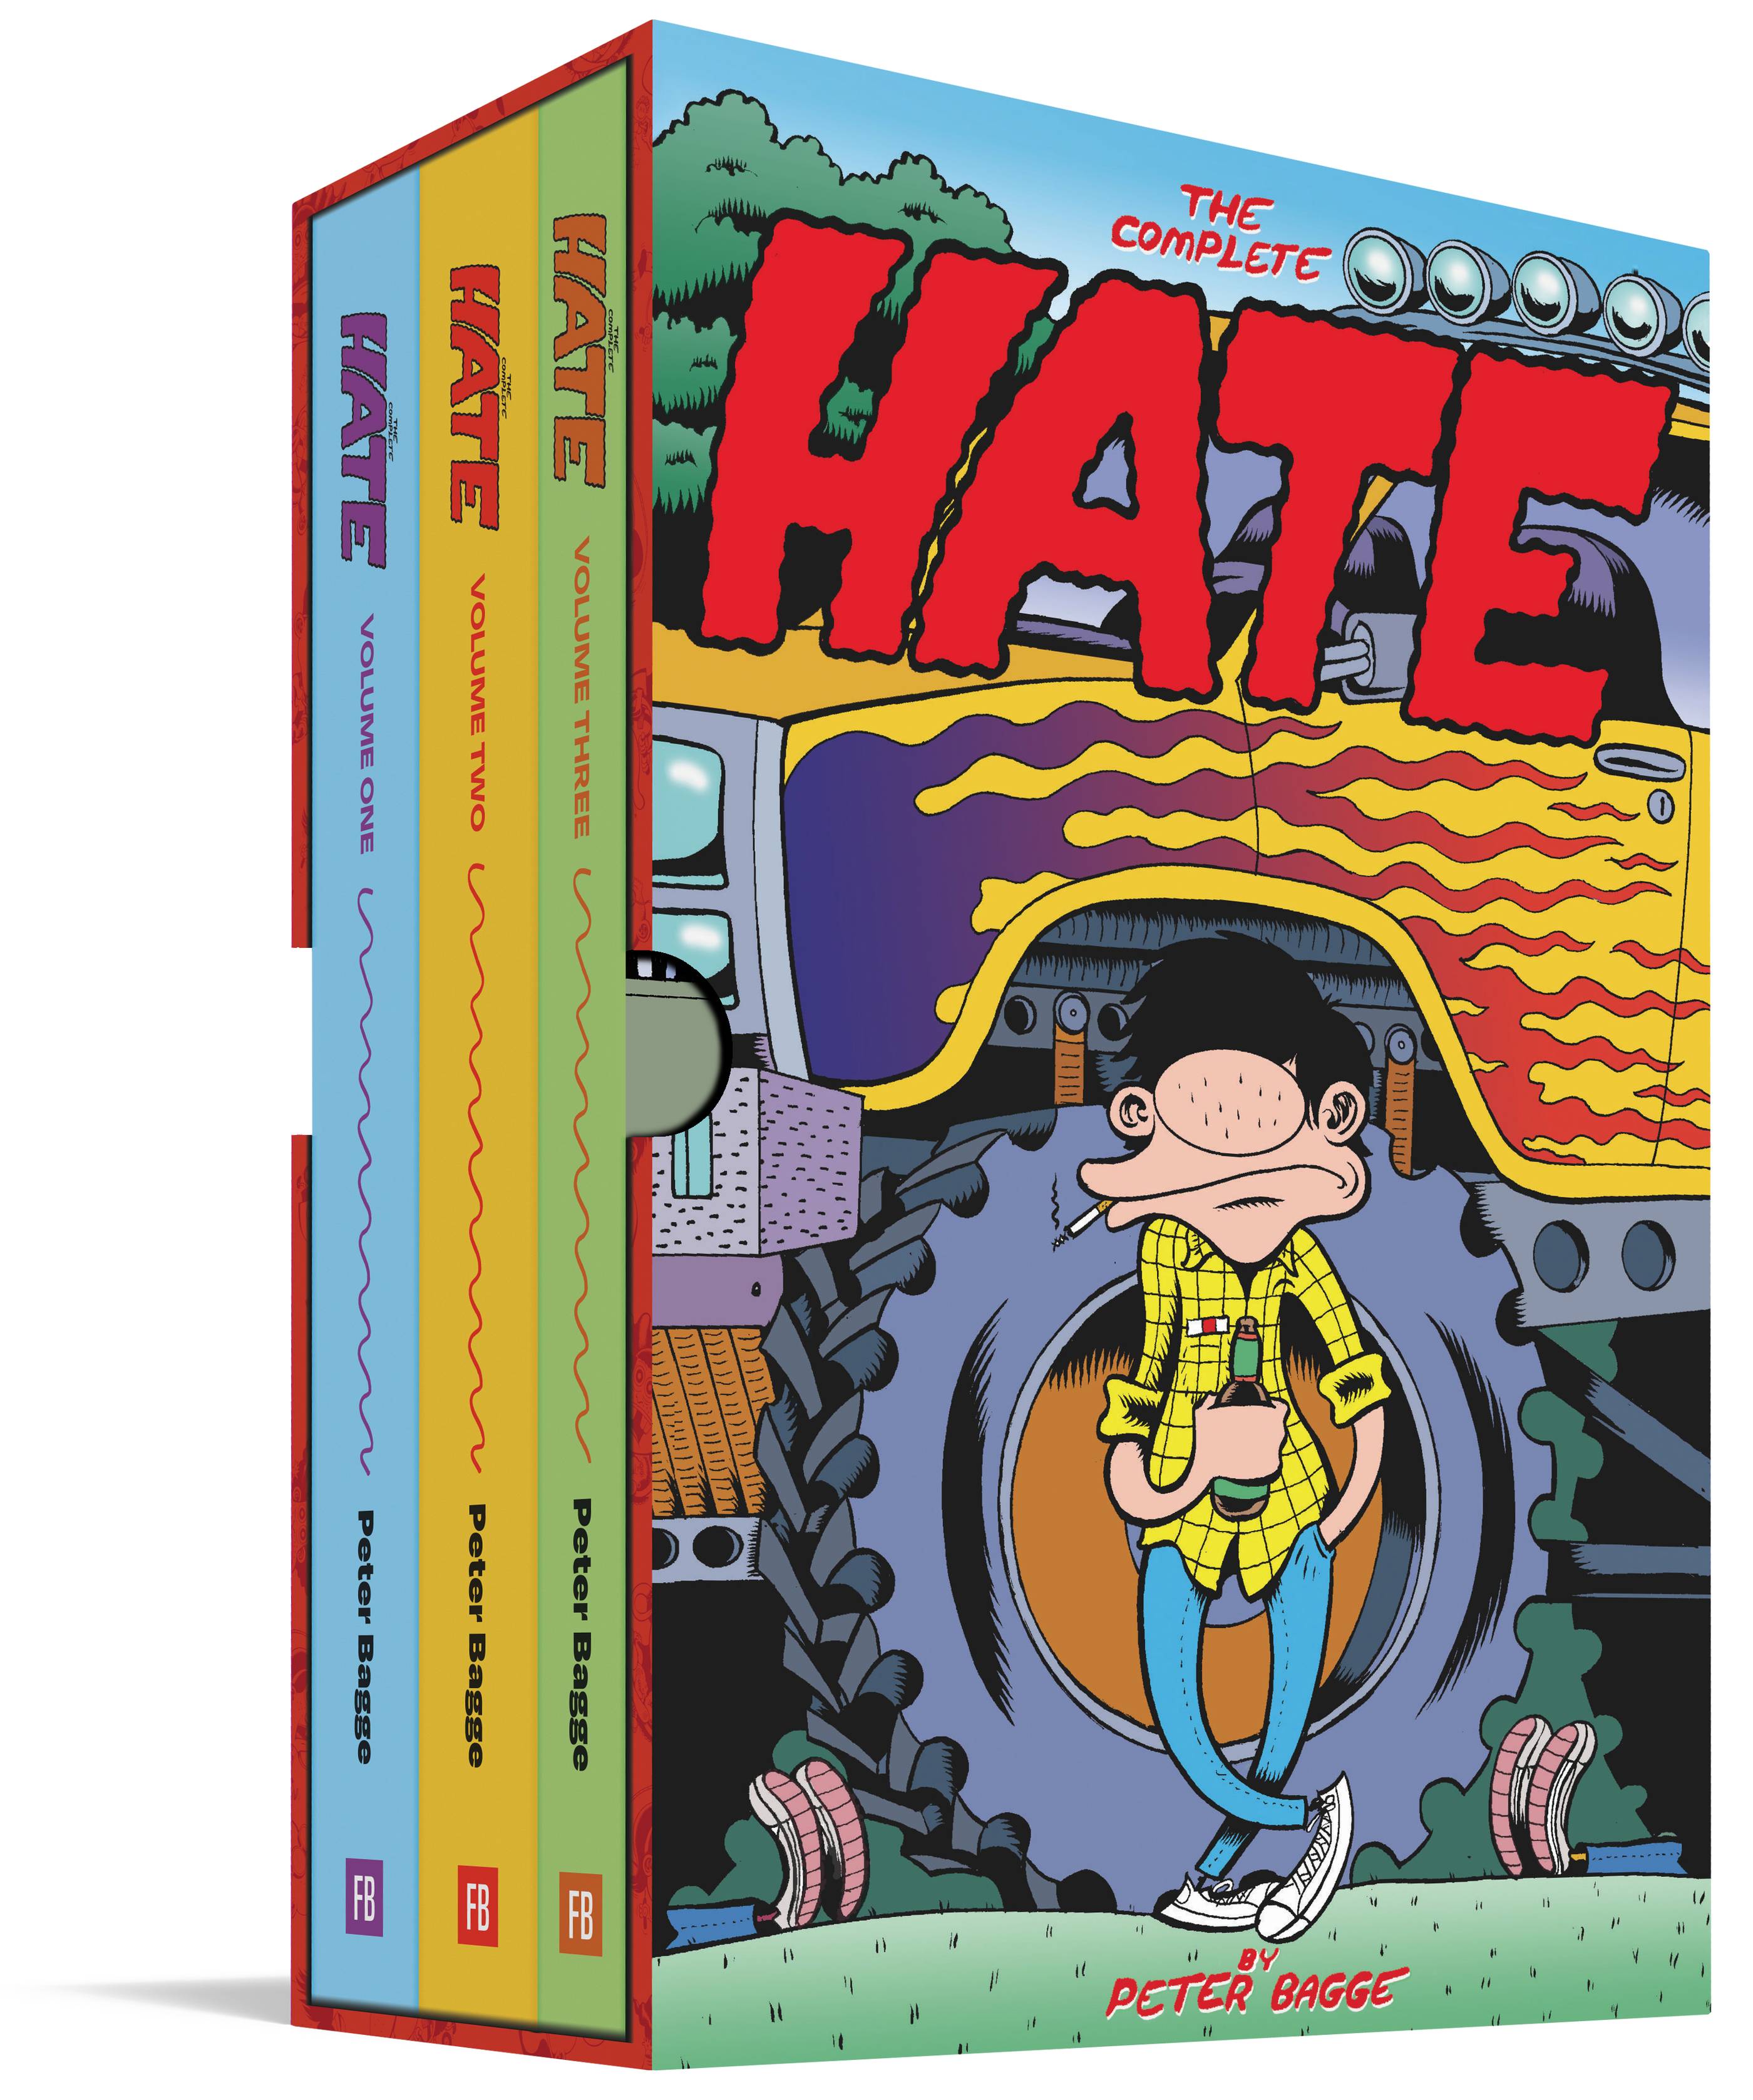 COMPLETE HATE HC PETER BAGGE (MR)